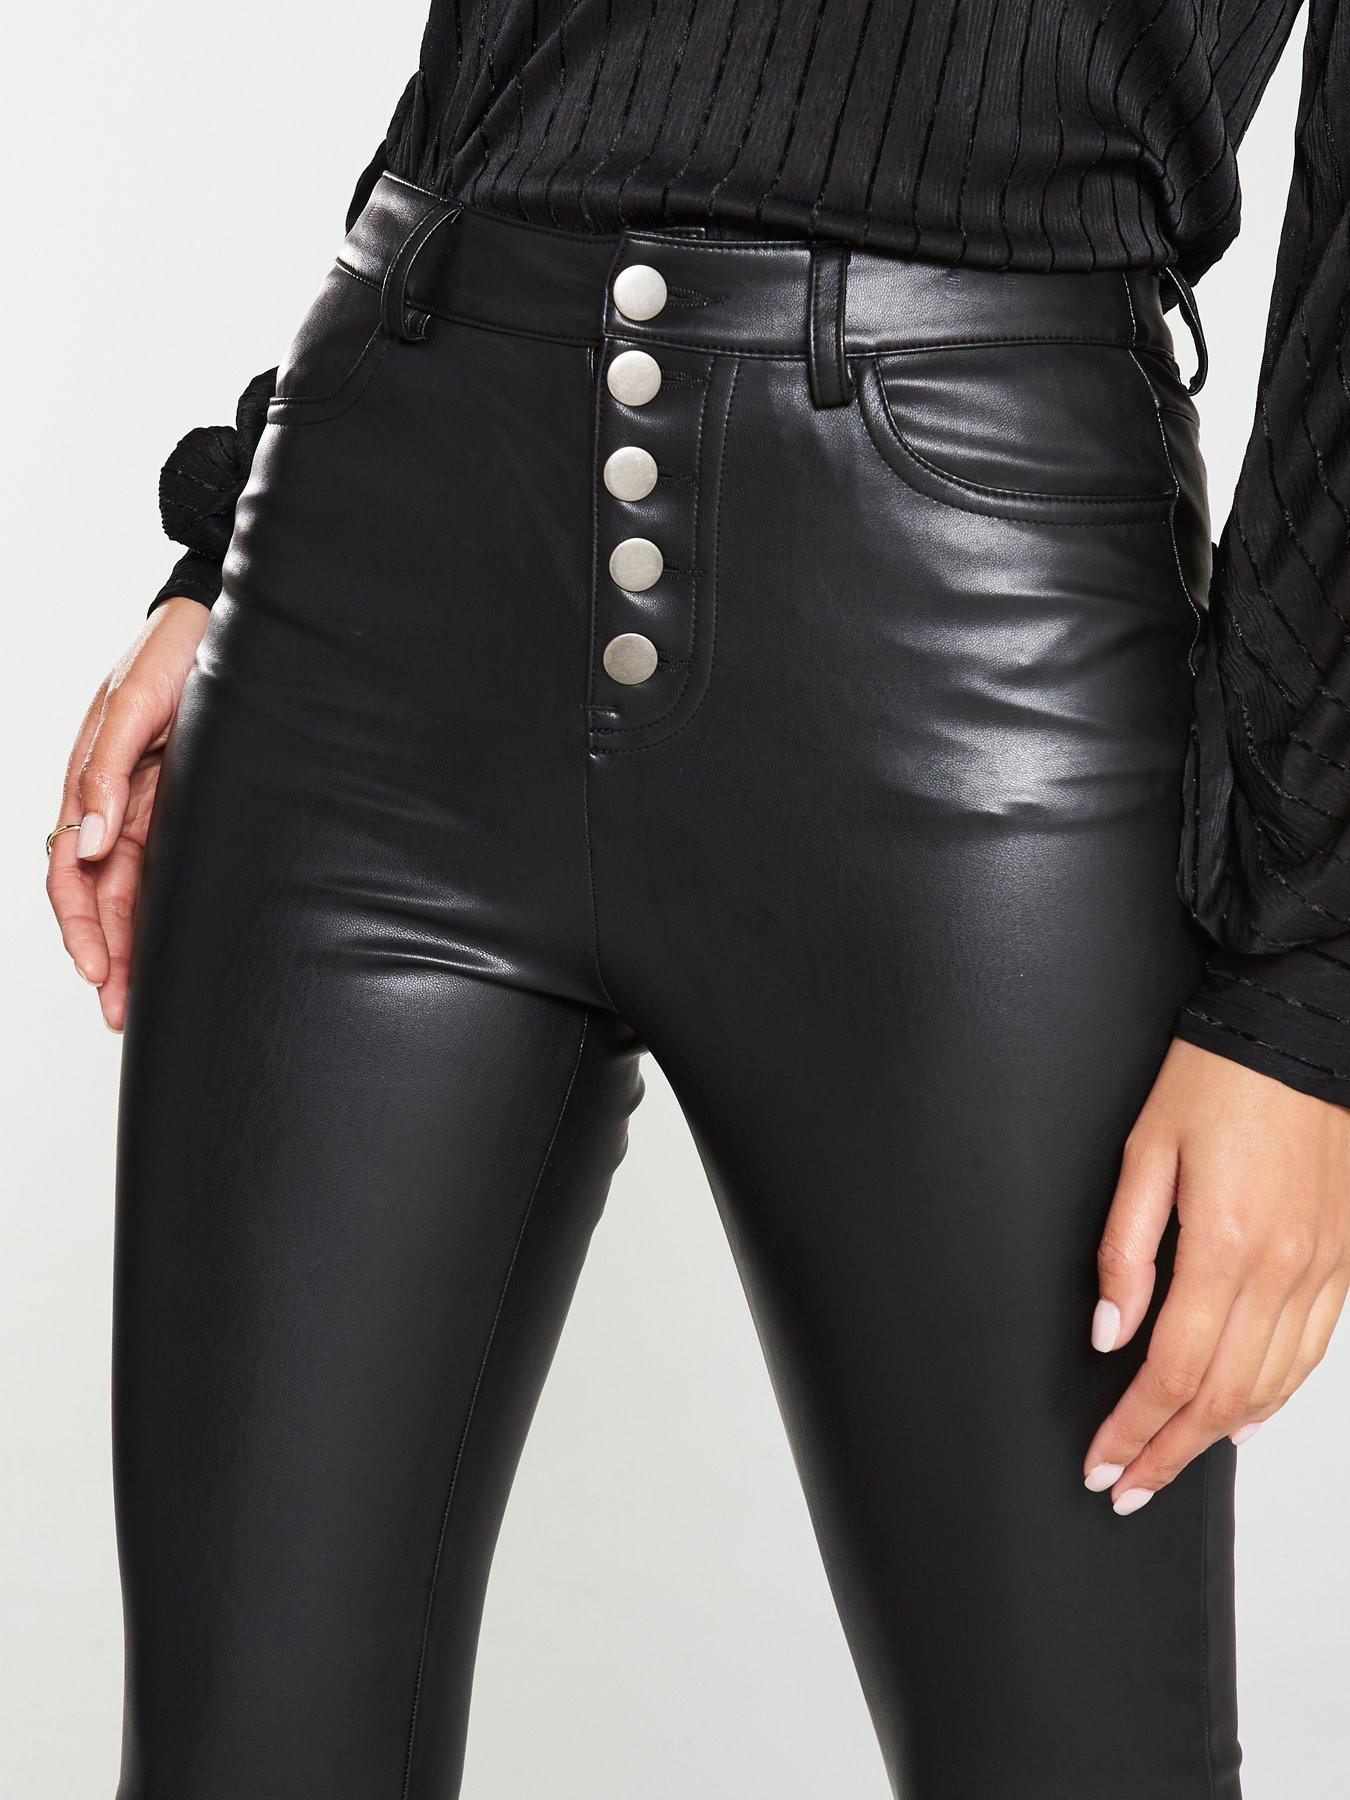 leather trousers very